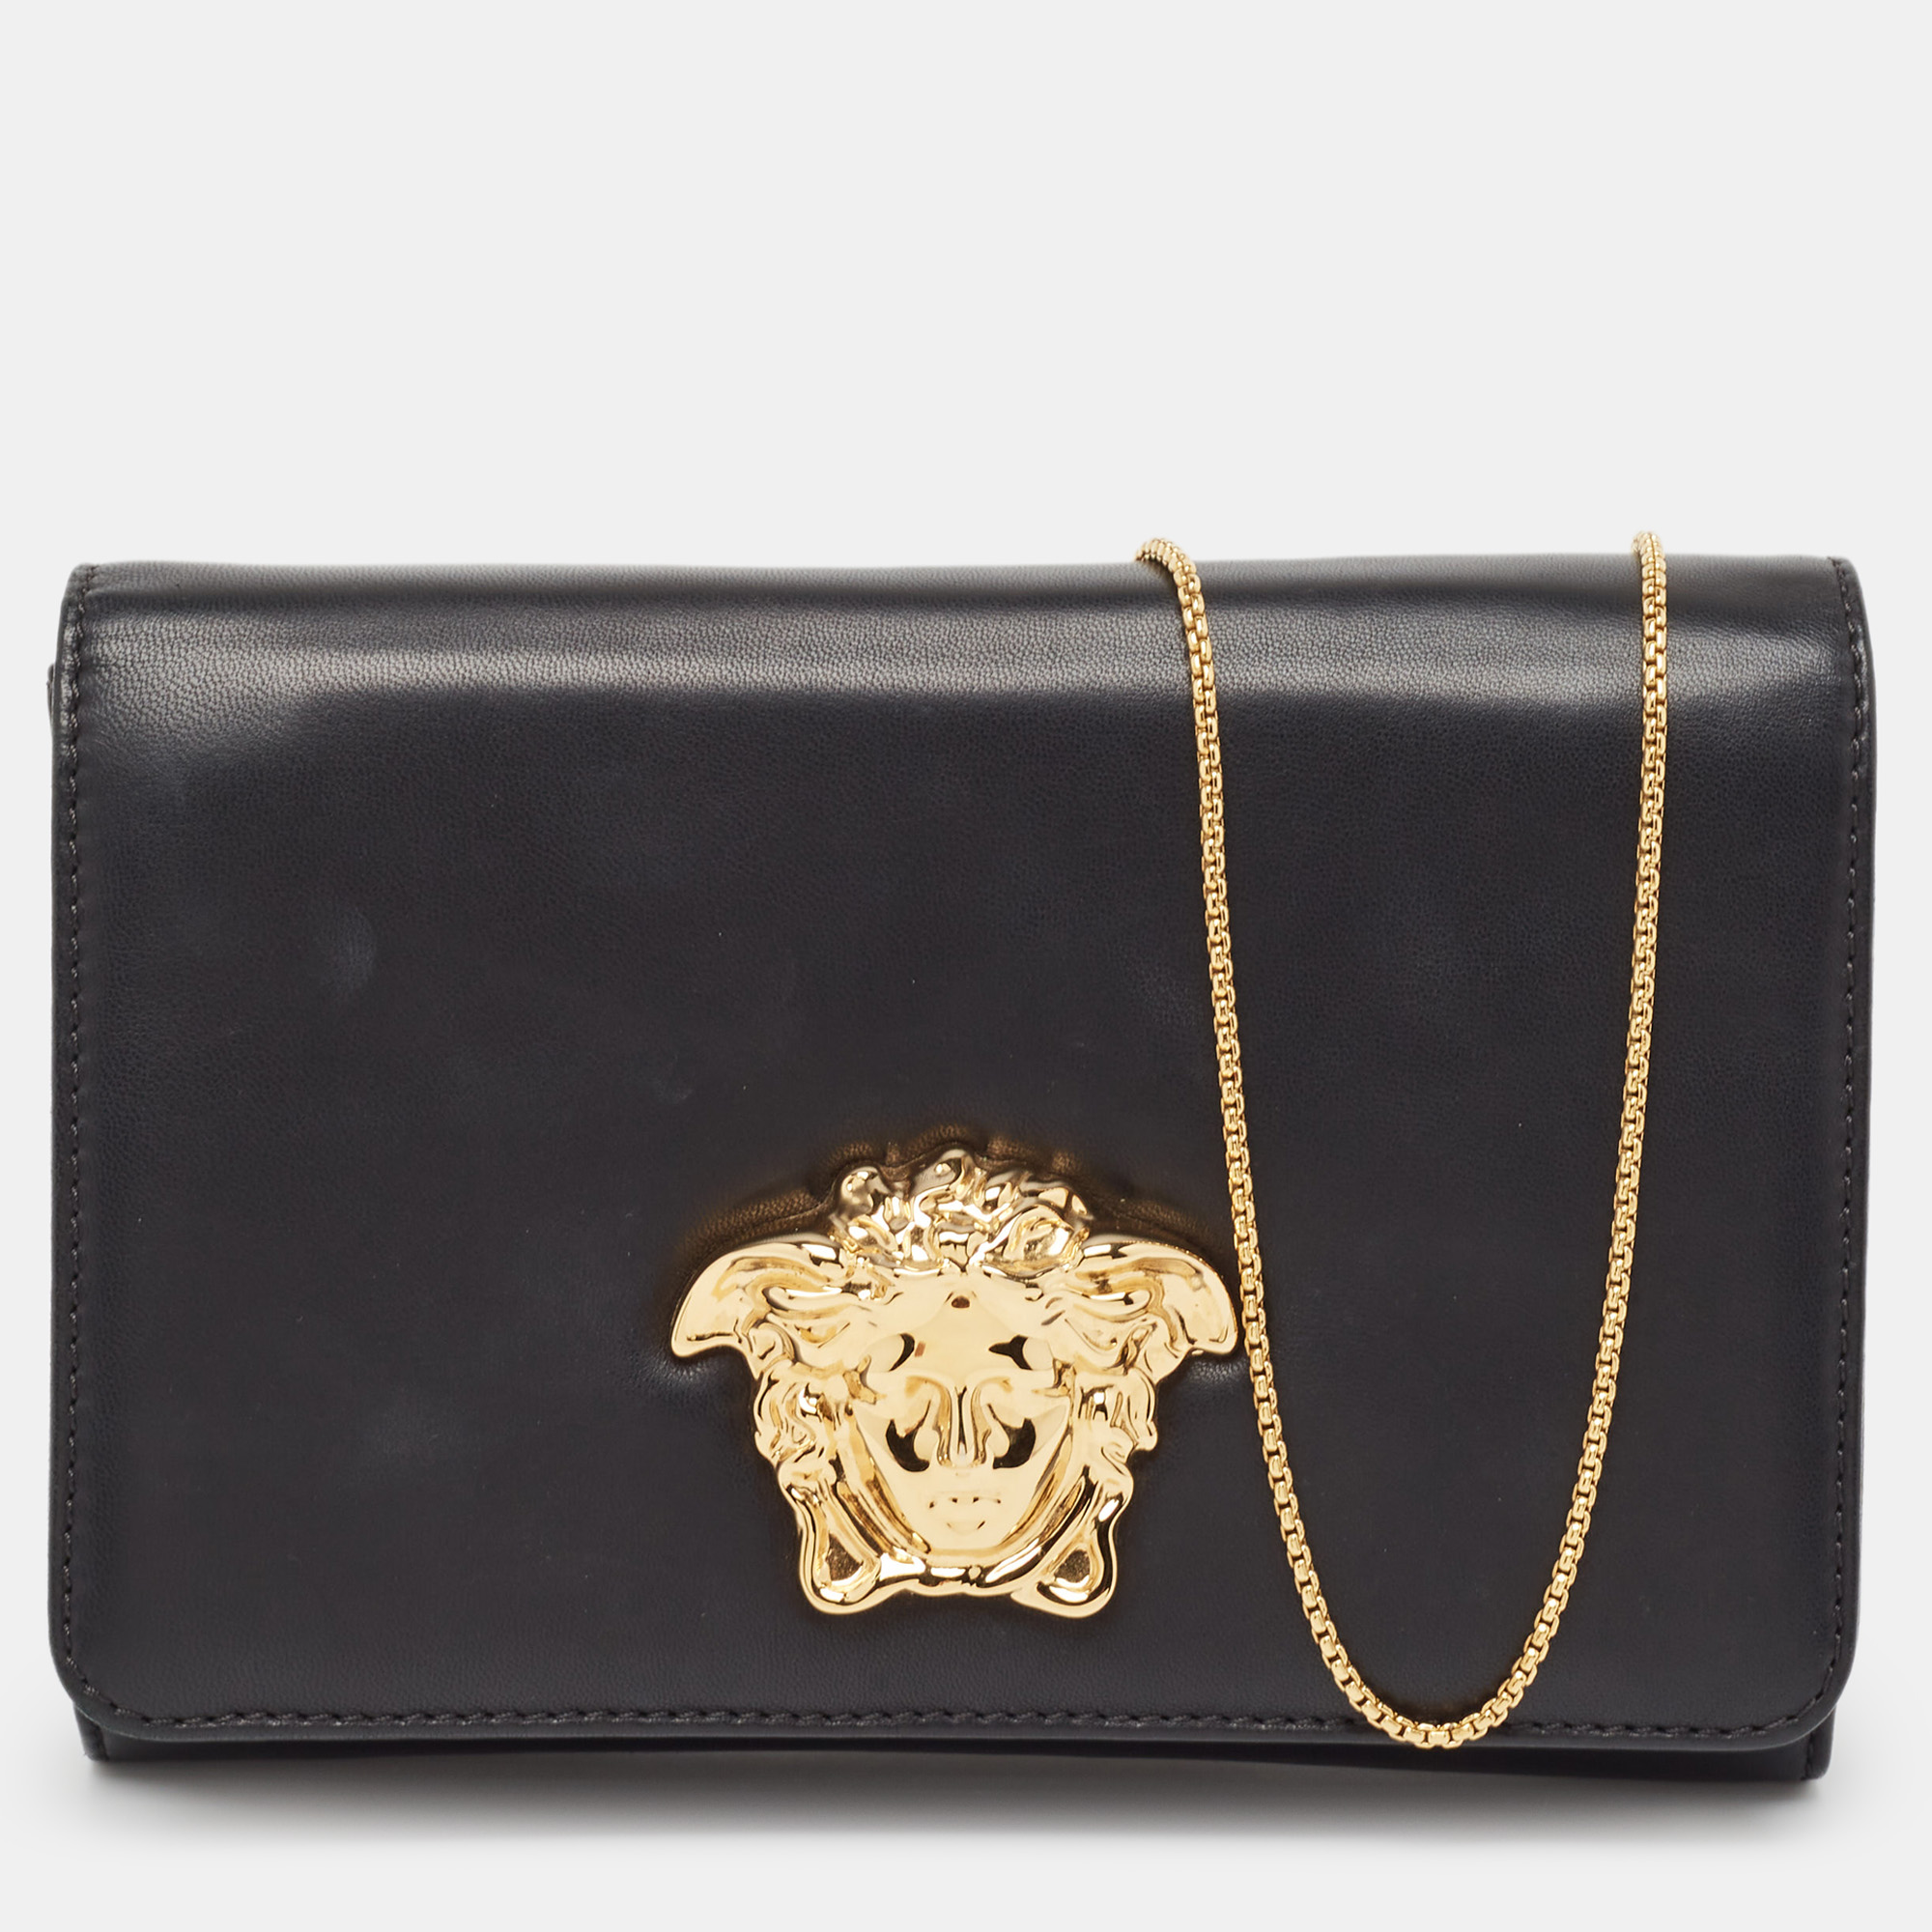 Pre-owned Versace Black Leather Palazzo Medusa Chain Clutch